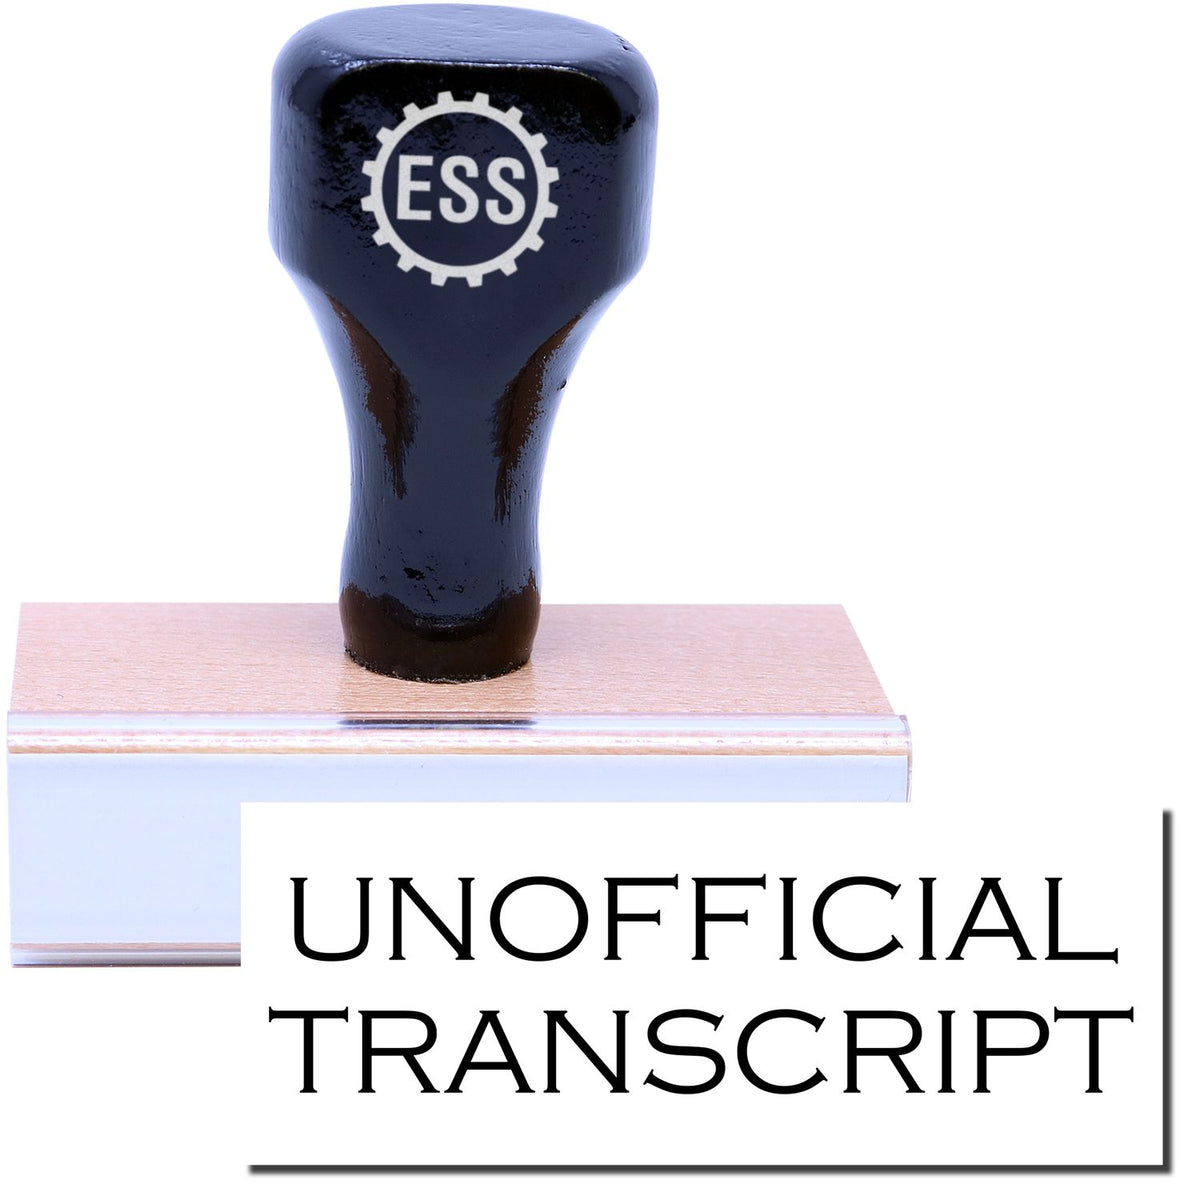 A stock office rubber stamp with a stamped image showing how the text &quot;UNOFFICIAL TRANSCRIPT&quot; in a large font is displayed after stamping.